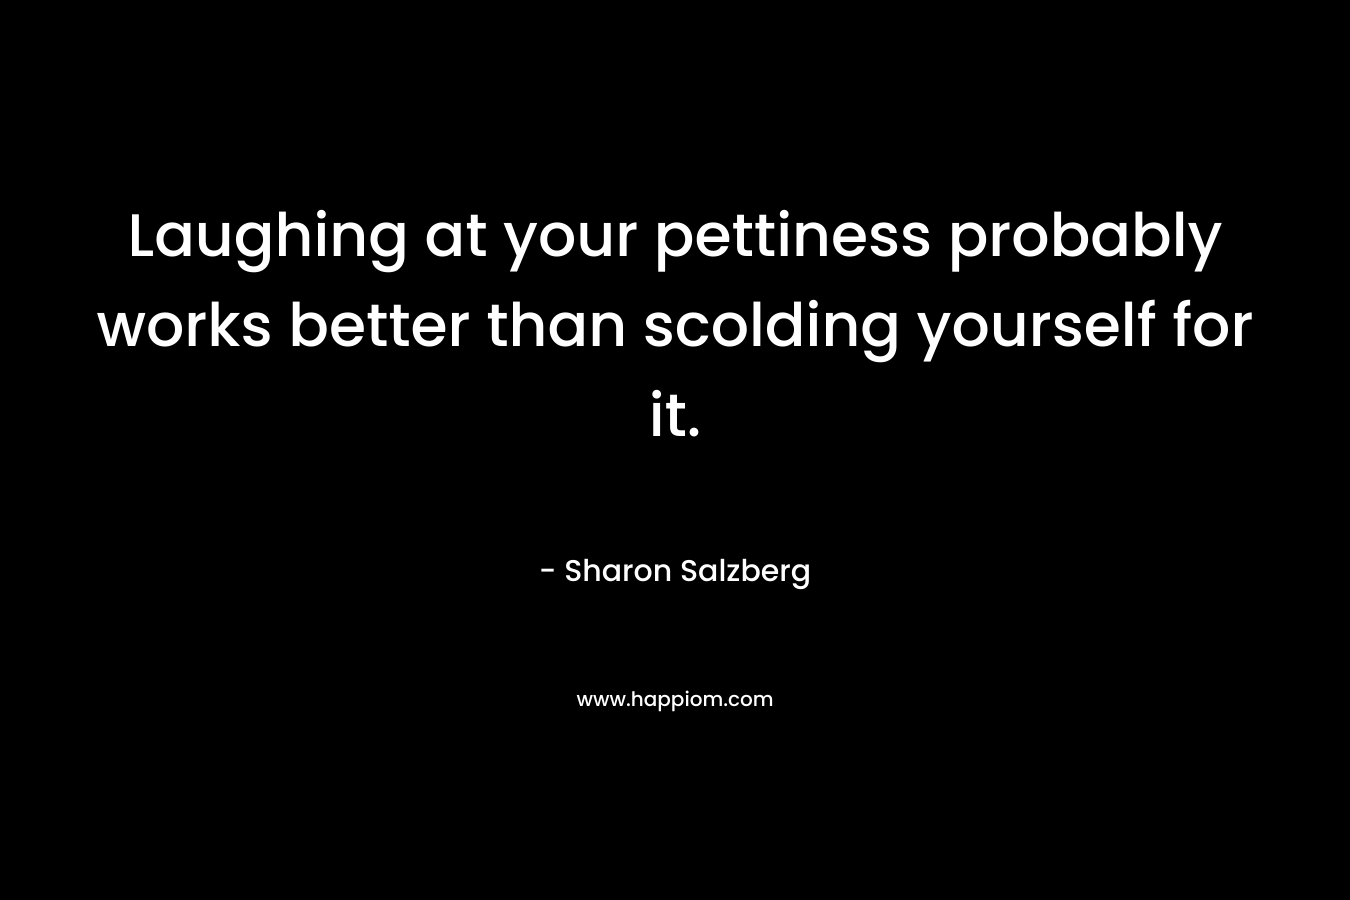 Laughing at your pettiness probably works better than scolding yourself for it.